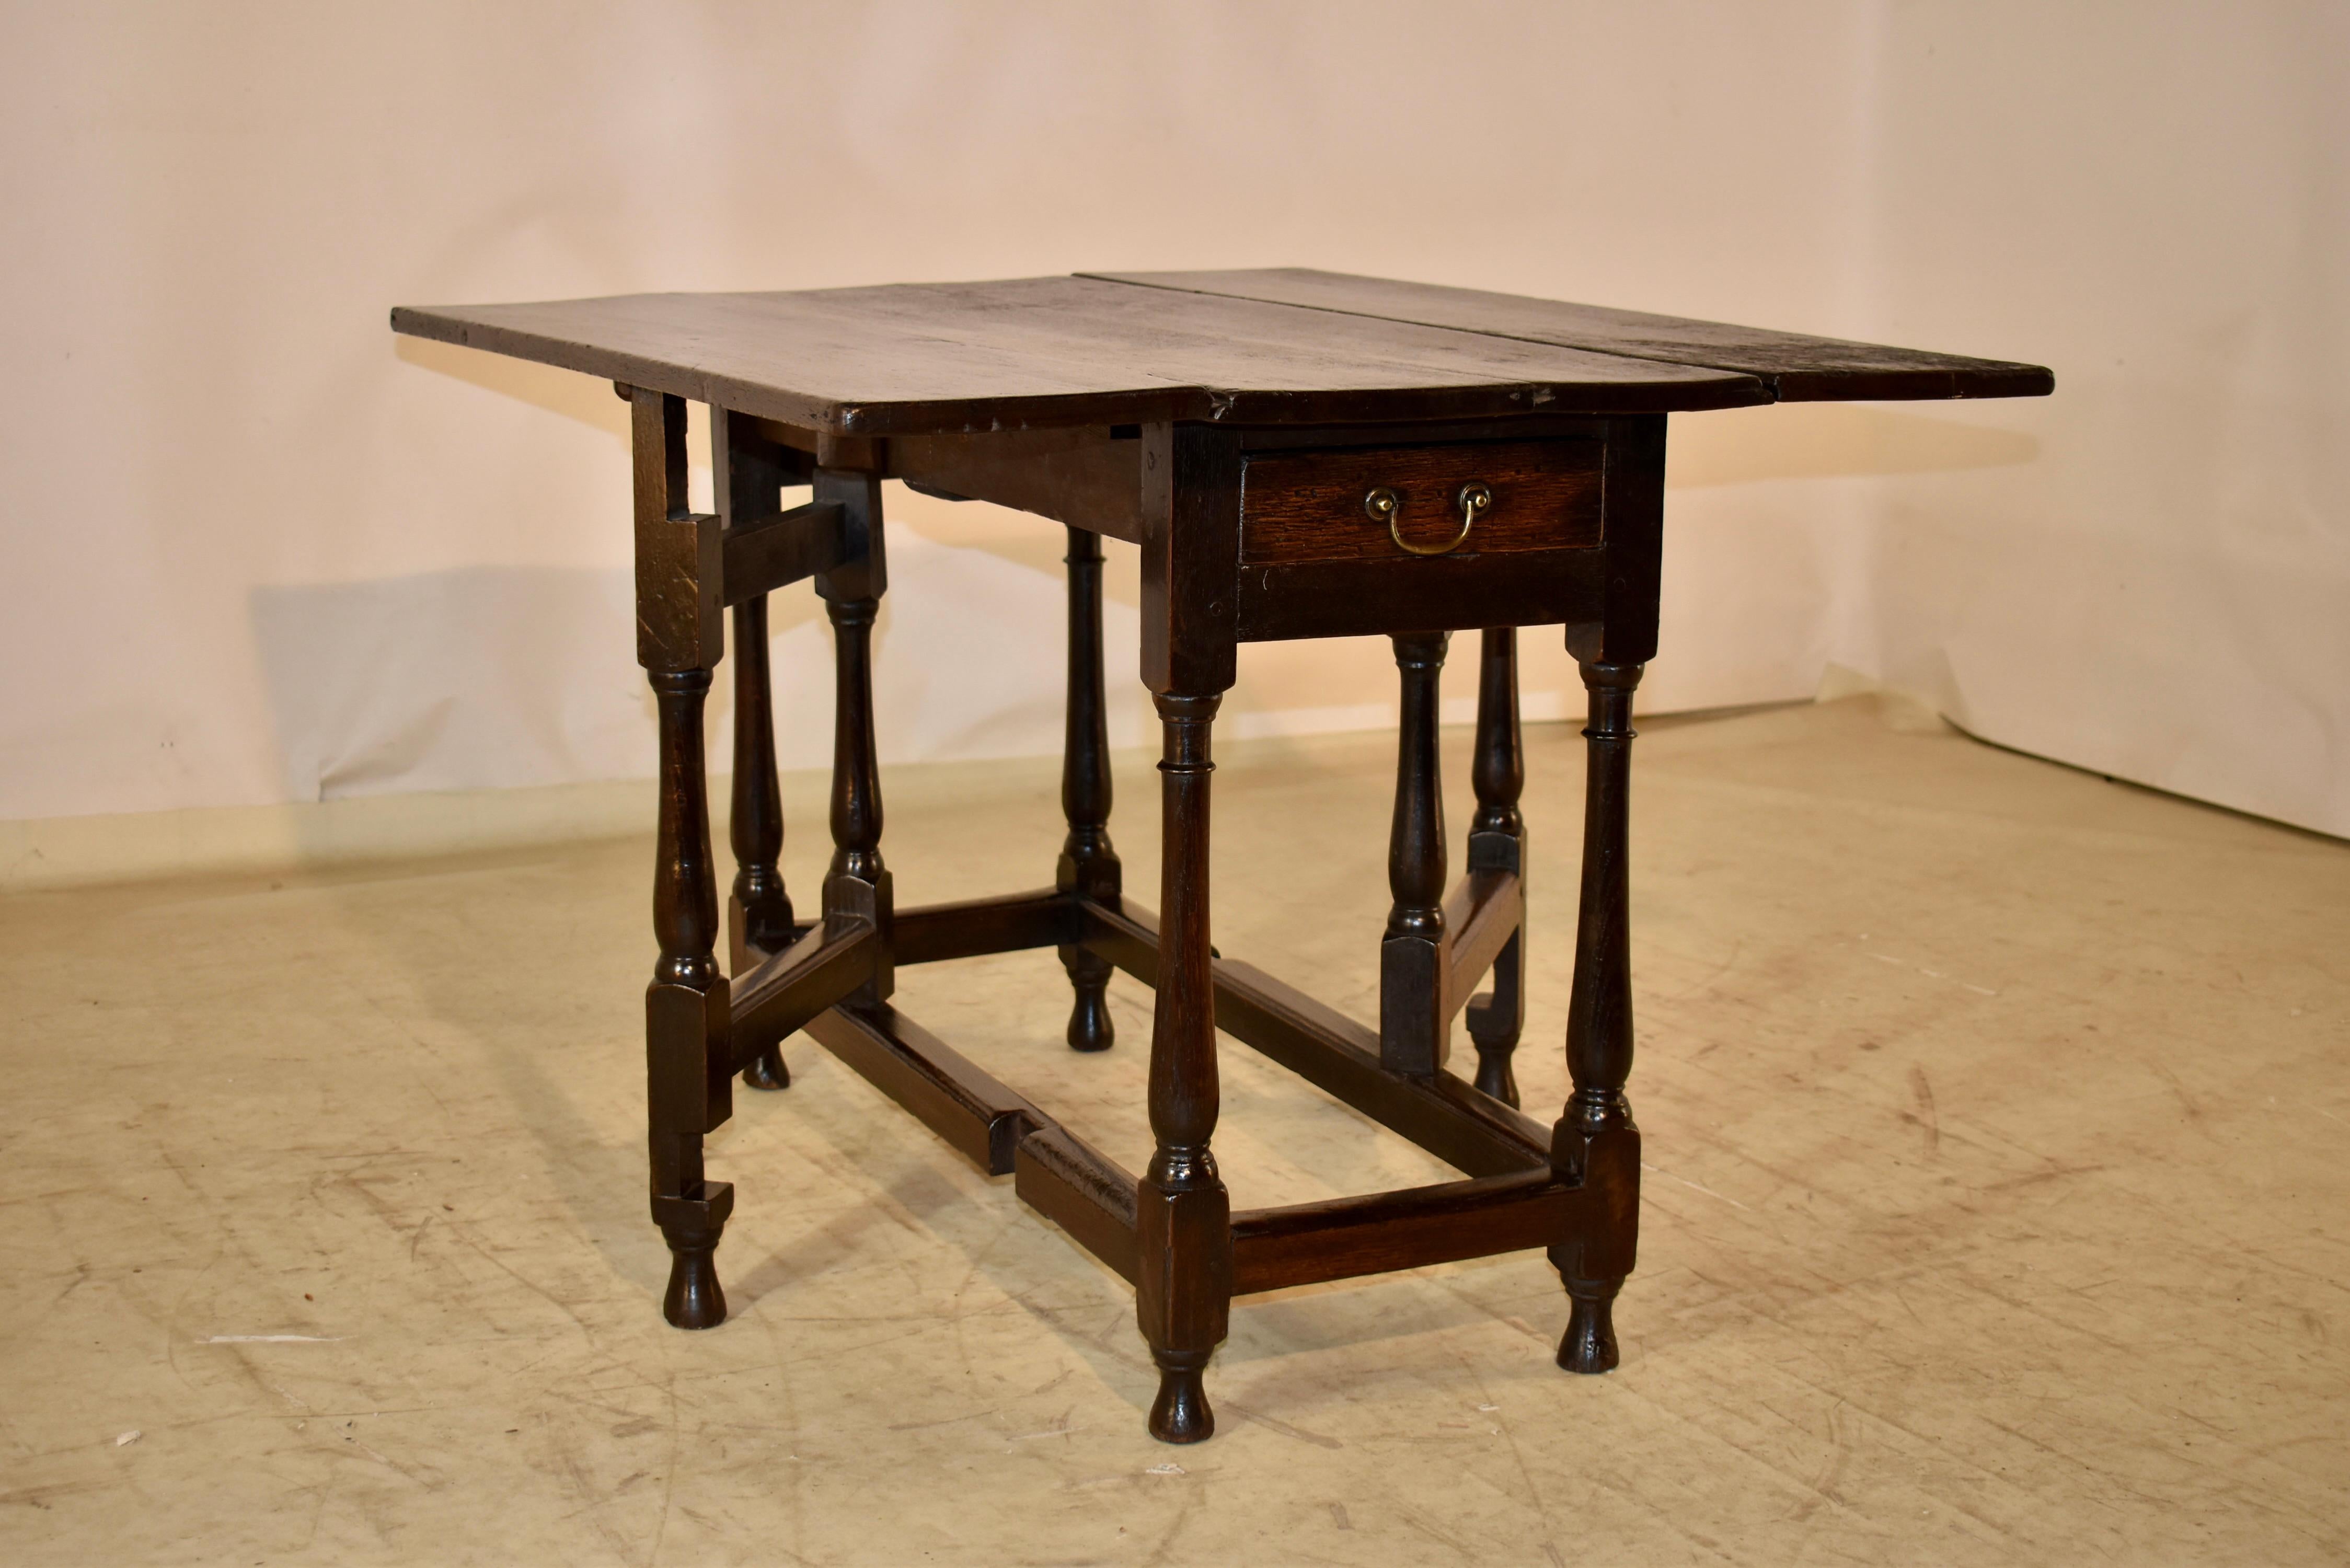 Late 17th - Early 18th Century Drop Leaf Table from England For Sale 4